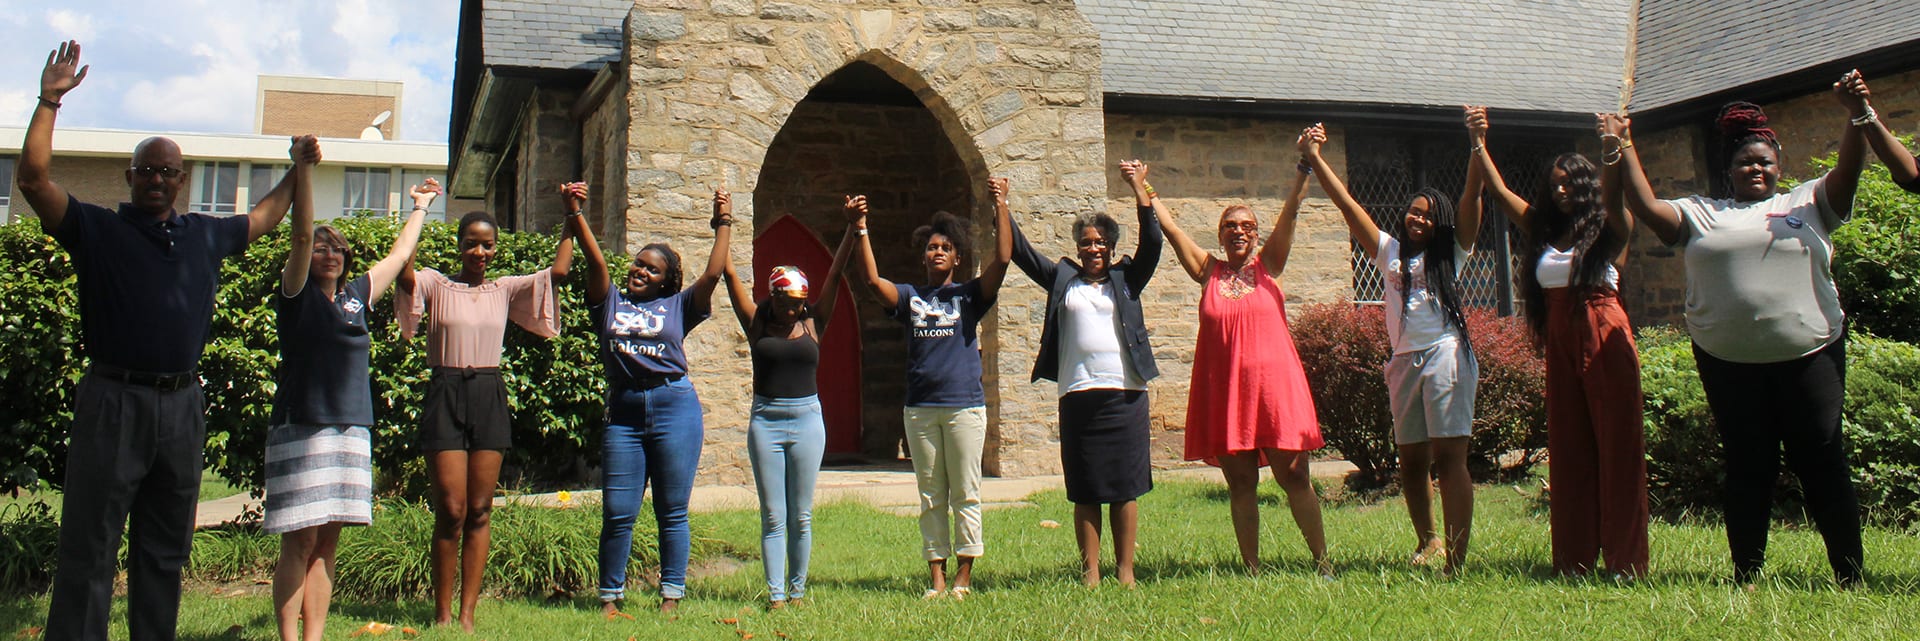 Group of students with joined hands in front of campus church